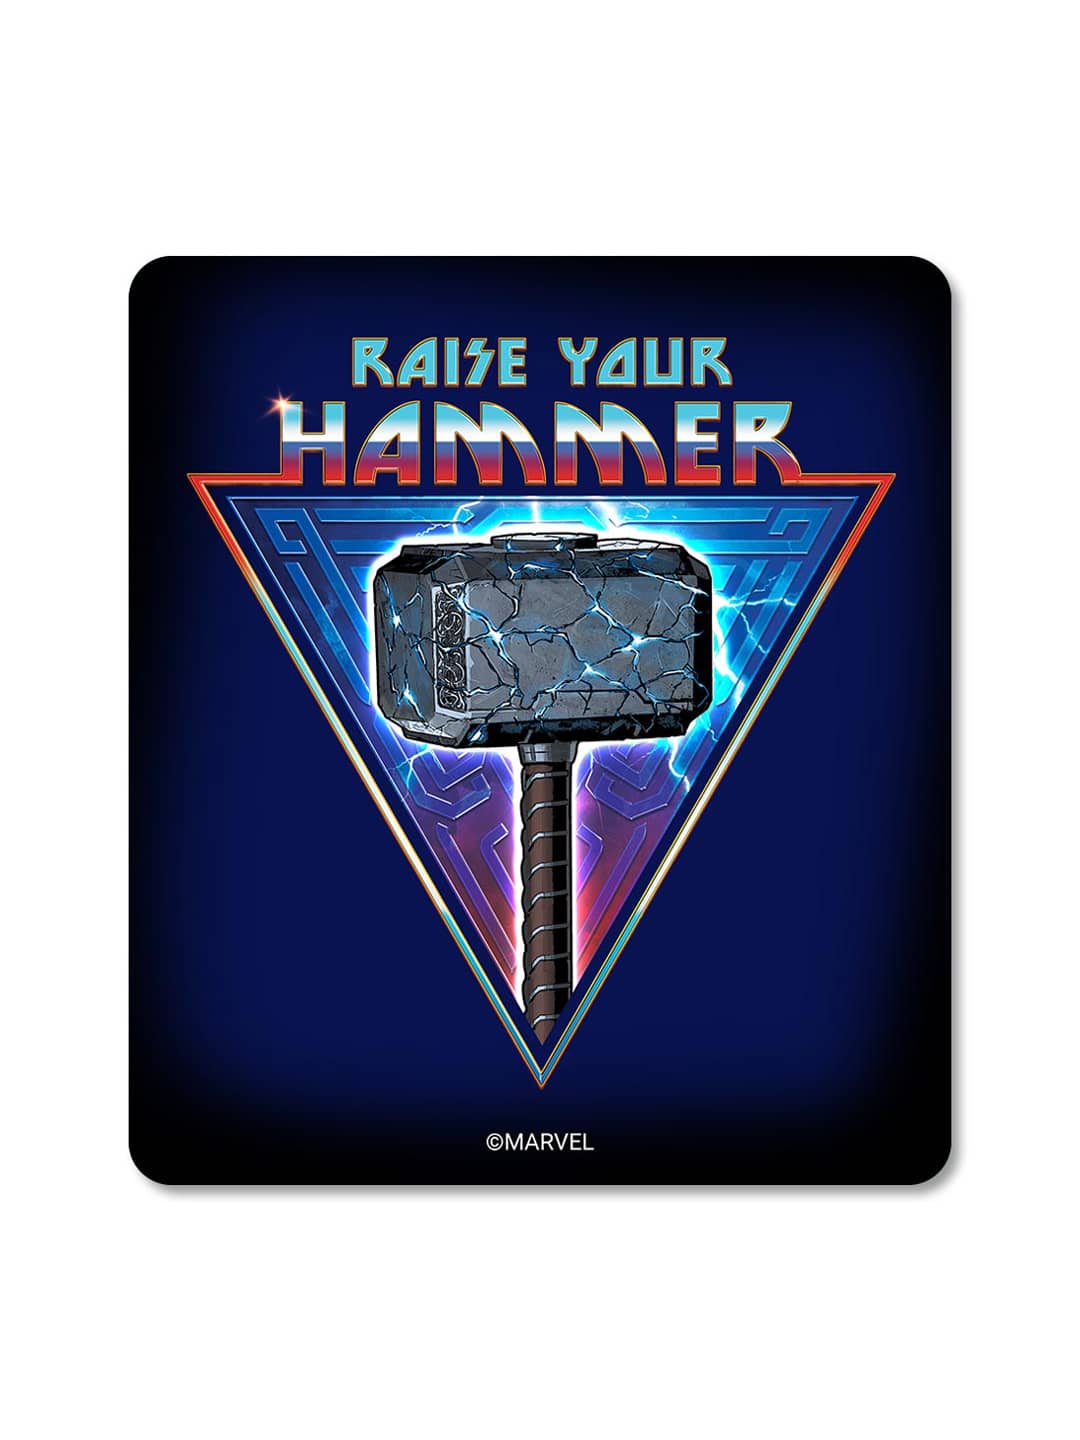 Buy Mighty Raise your Hammer - Macmerise Mouse Pad Mouse Pads Online